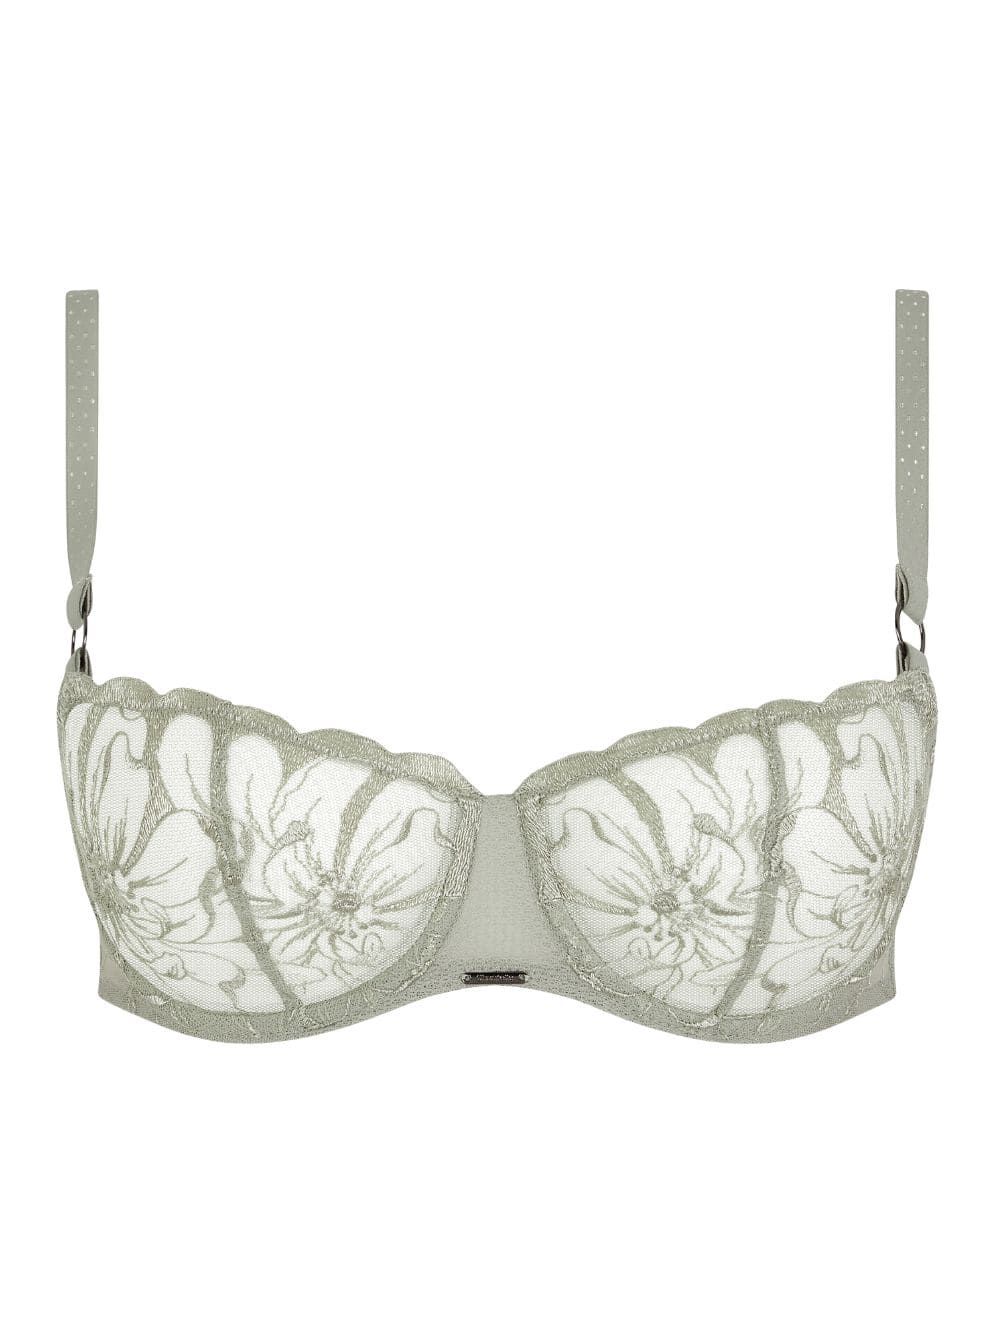 Fleurs by Chantelle underwired bra and soft lace. Great support